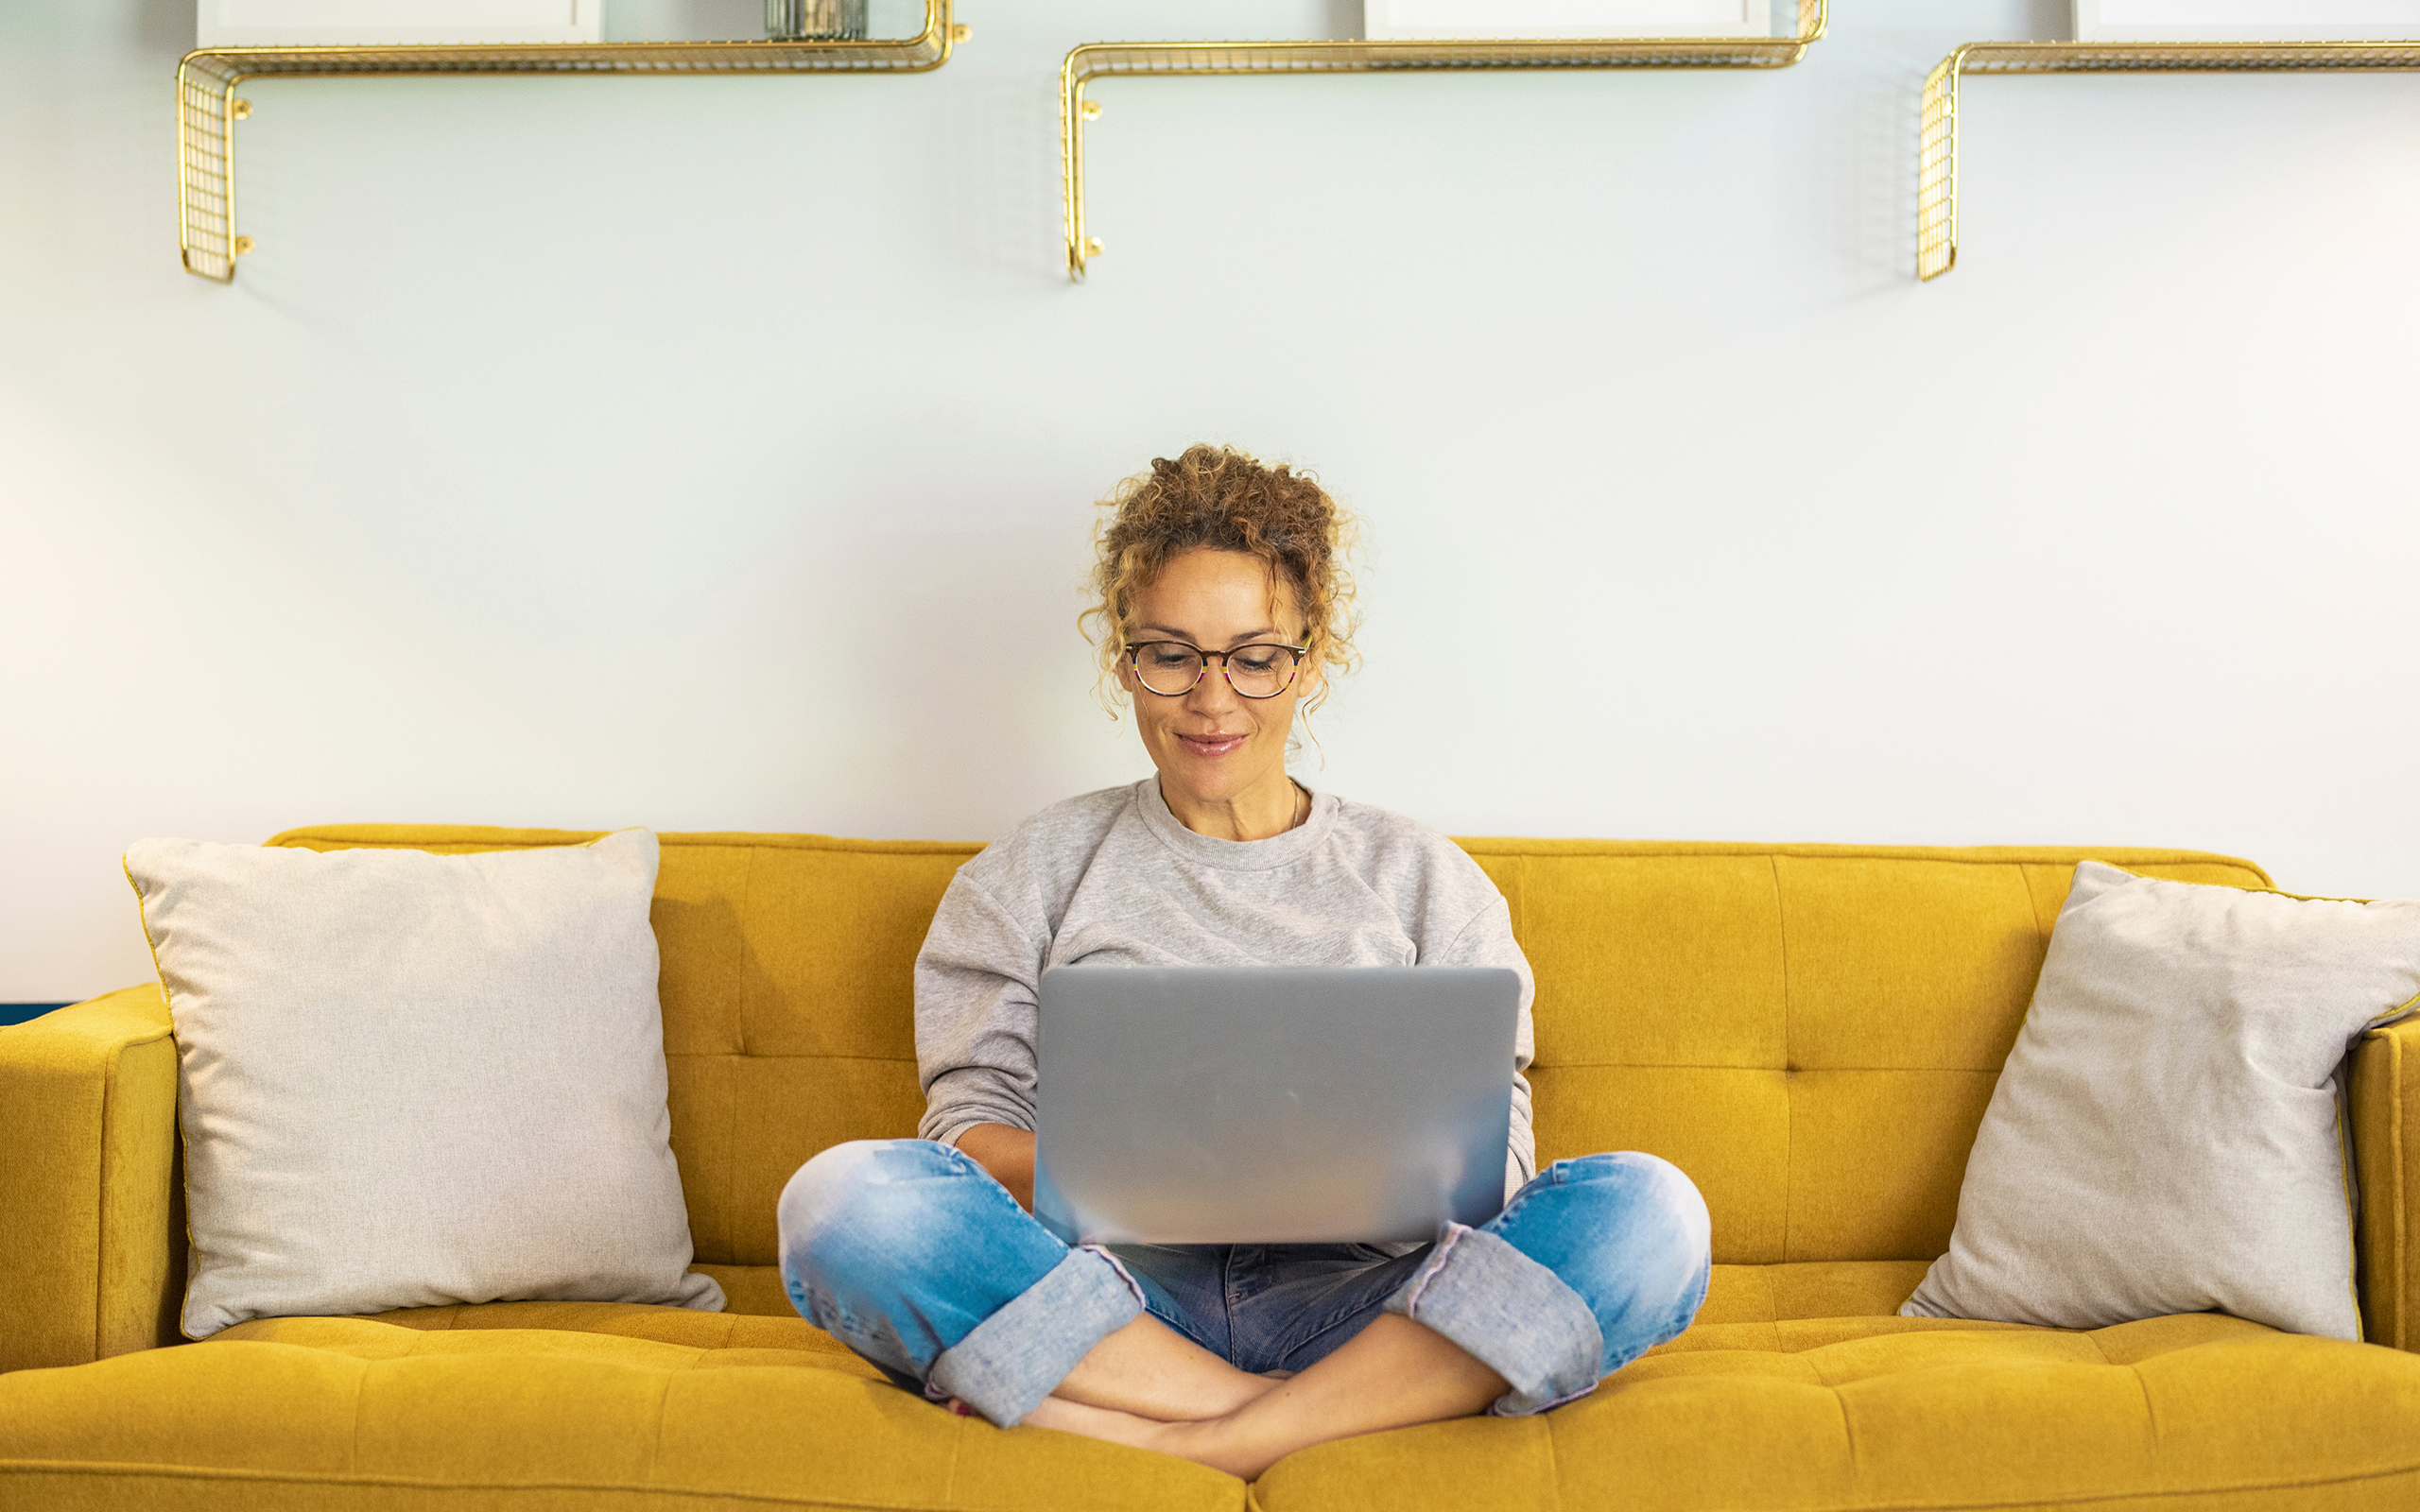 Women sitting cross legged on a mustard colored sofa with a laptop on her lap.